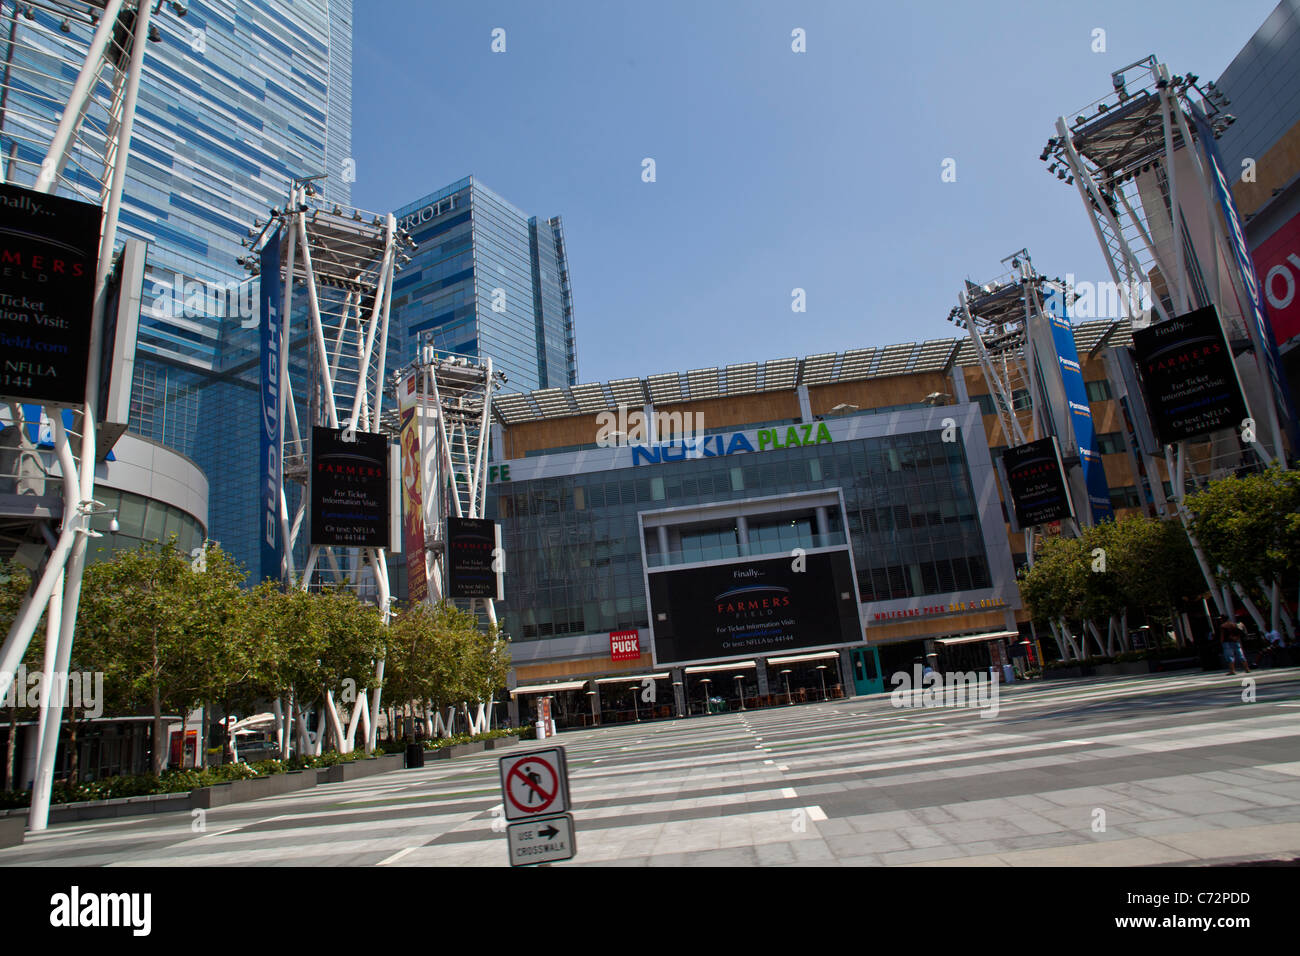 The Staples Center and Nokia Plaza complex in Los Angeles California Stock Photo